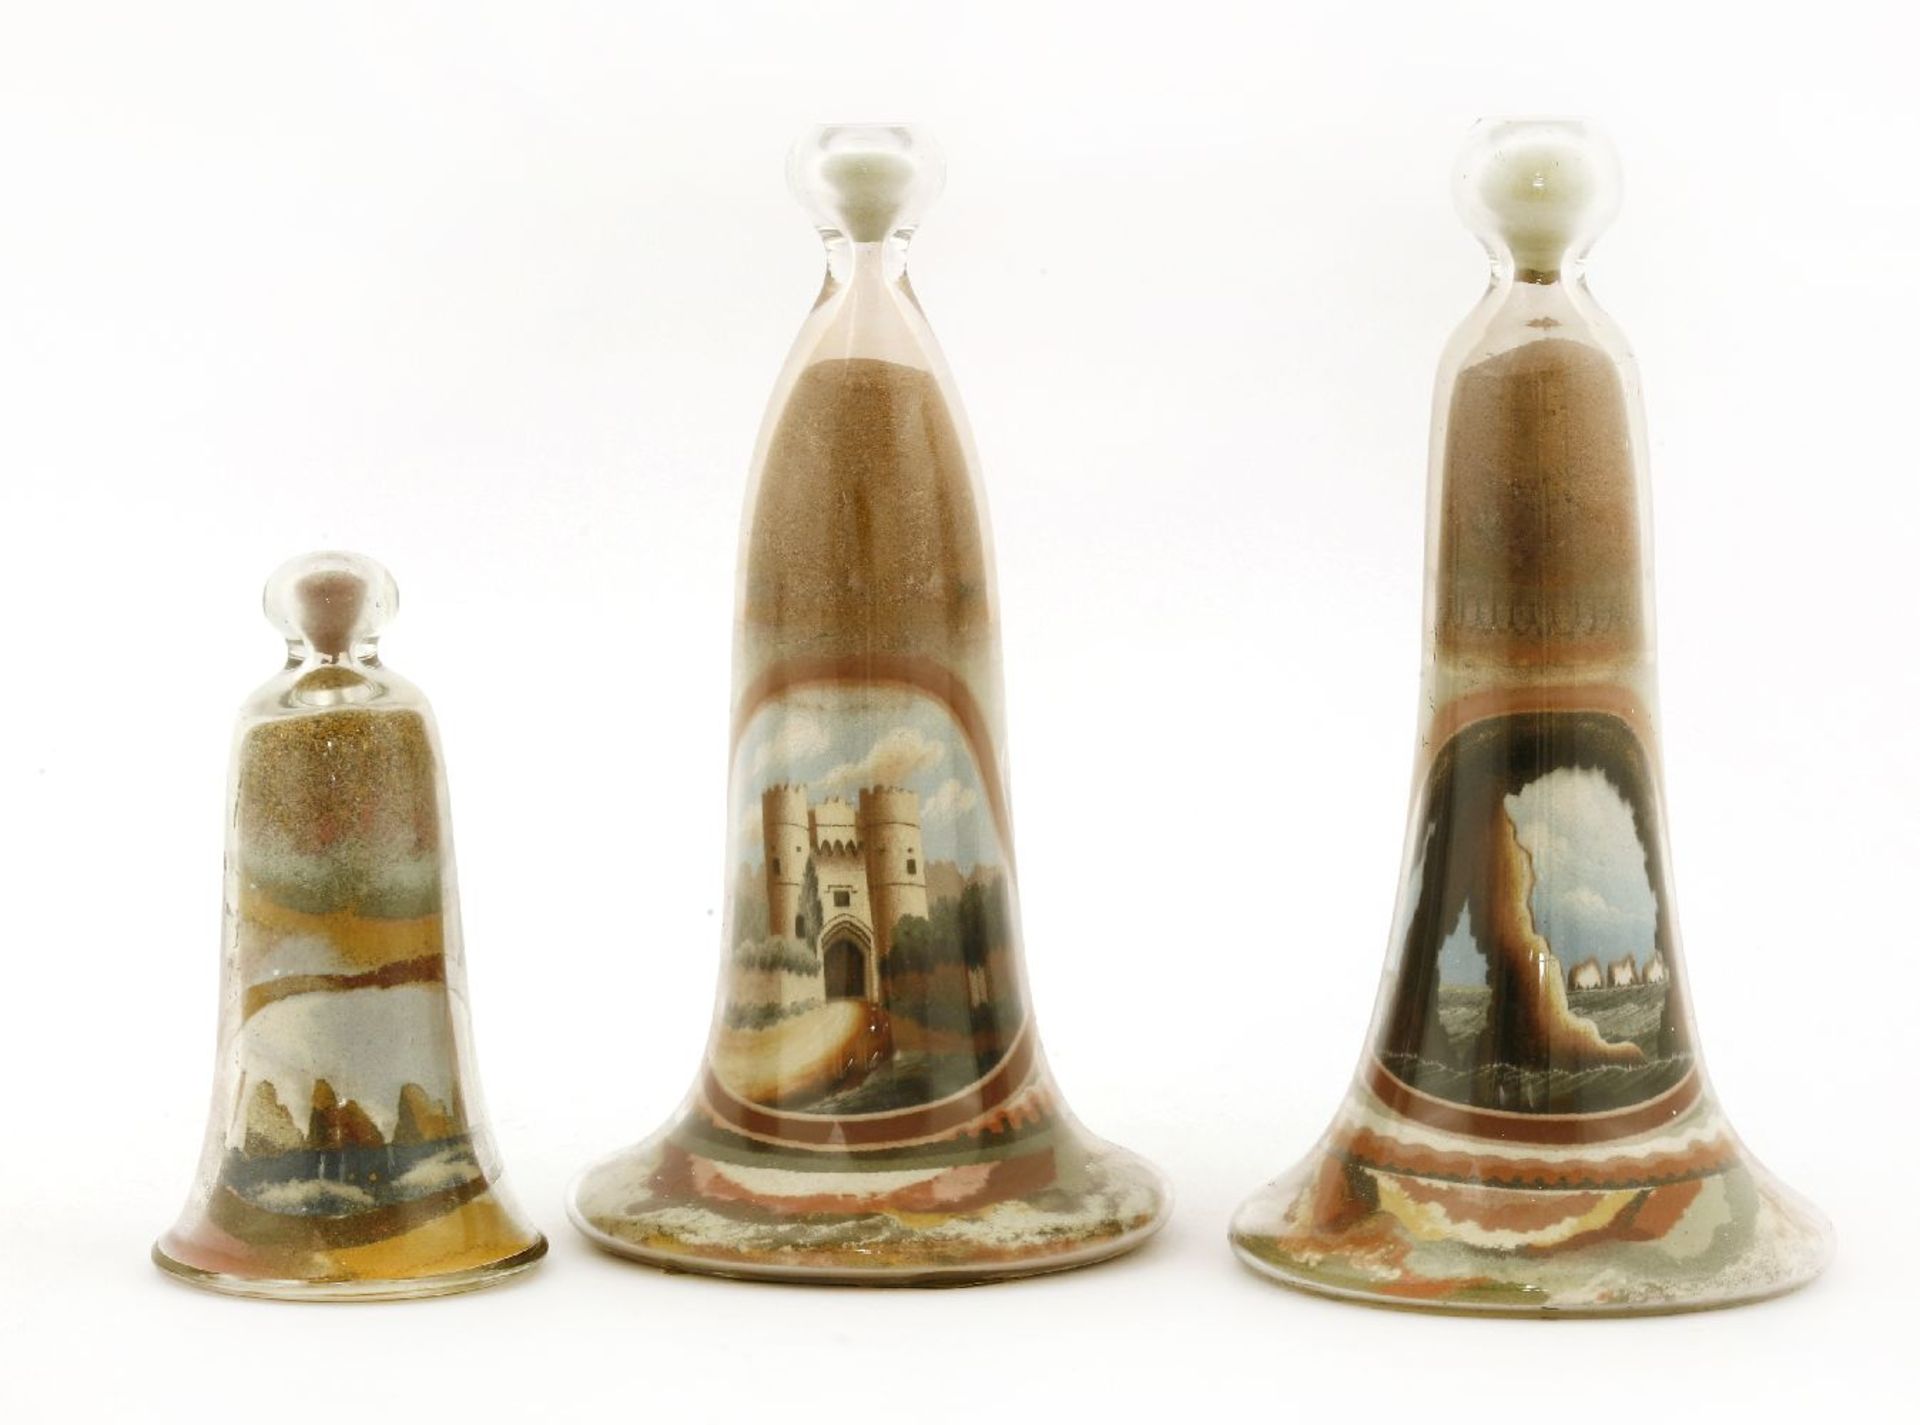 A pair of Alum Bay sand ornaments by W Carpenter,each in bell-shaped glass vessels, one with a